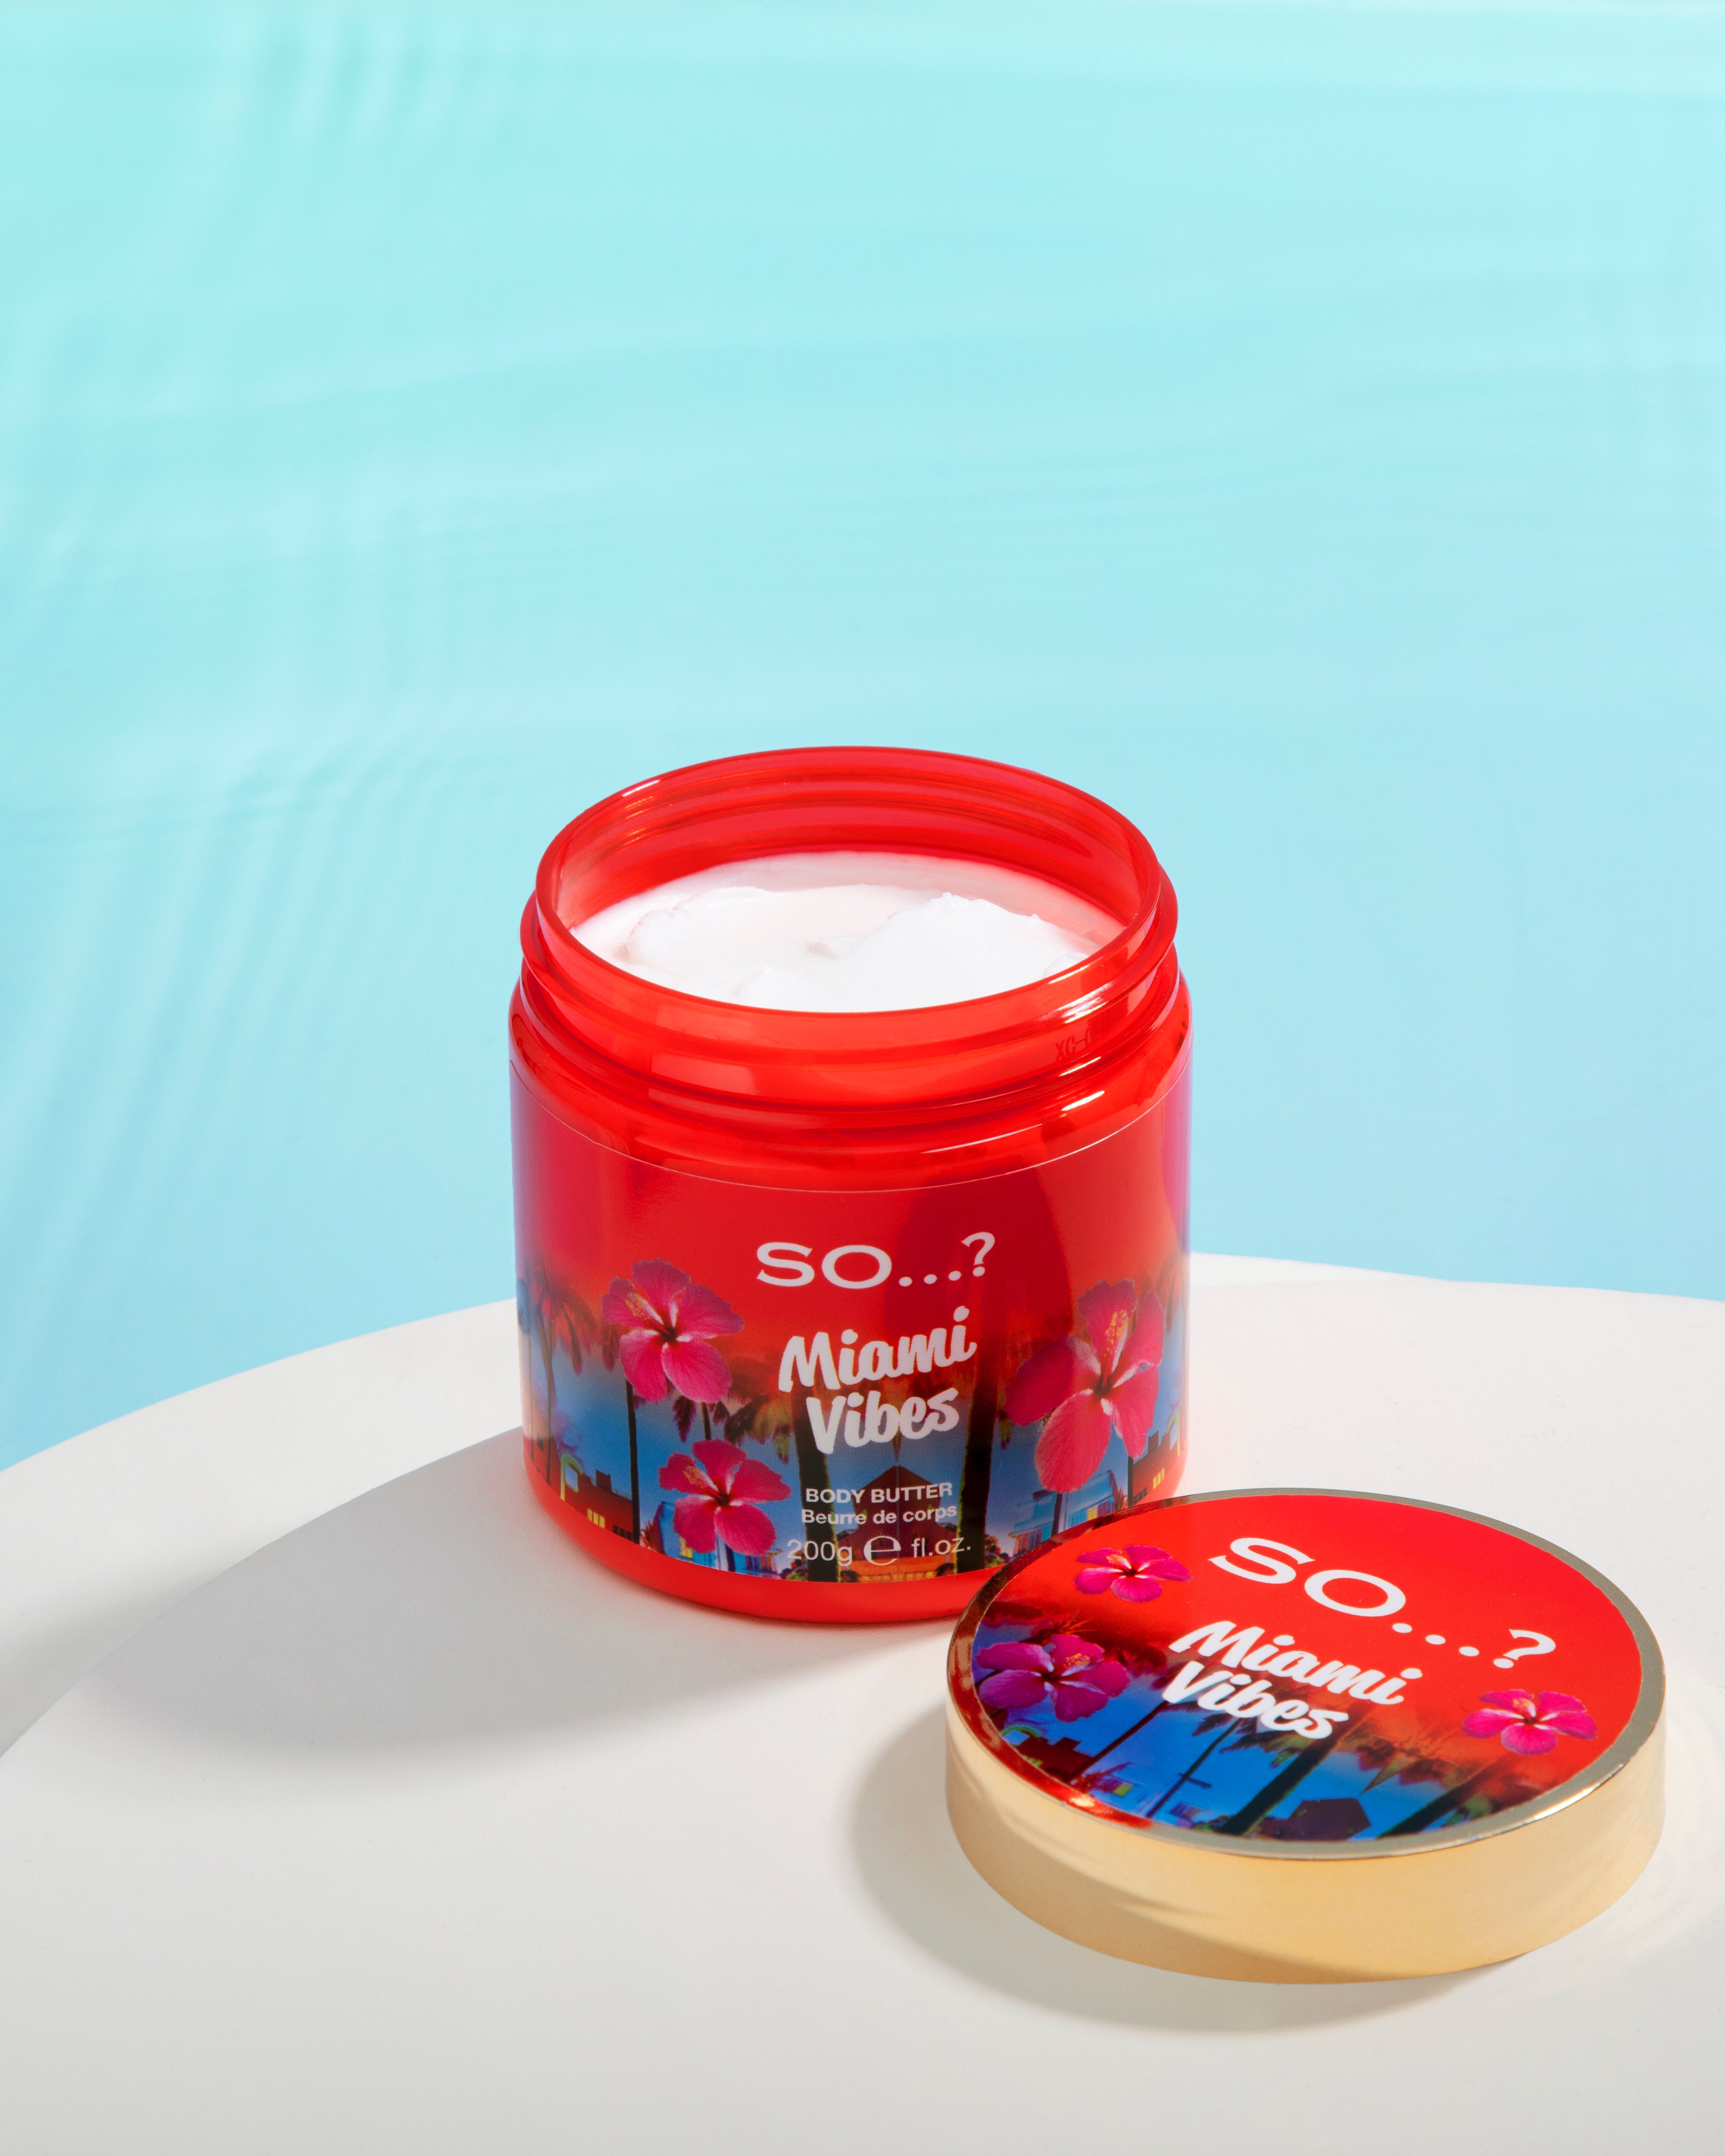 So...? Miami Vibes body butter 200ml